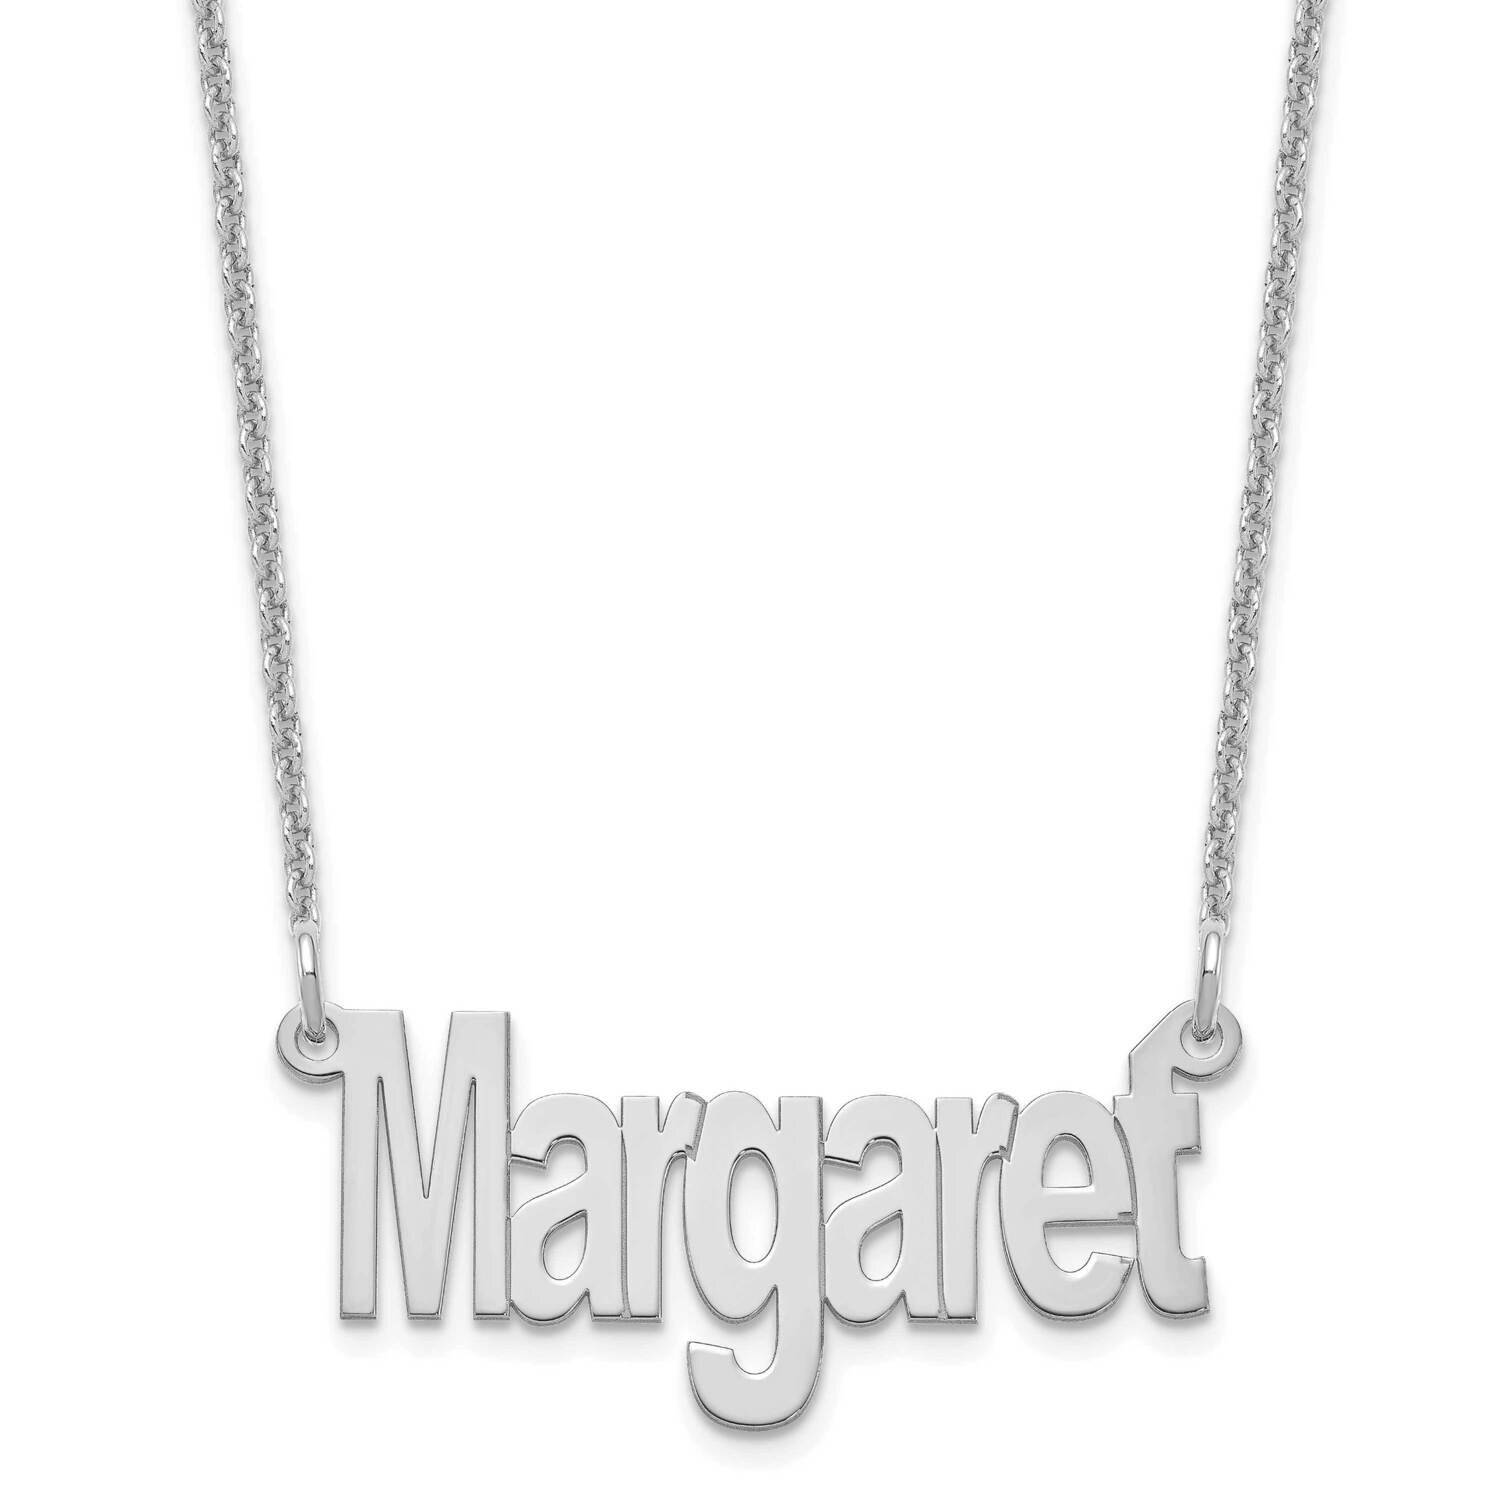 Name Plate Necklace 14k White Gold Small XNA1262W